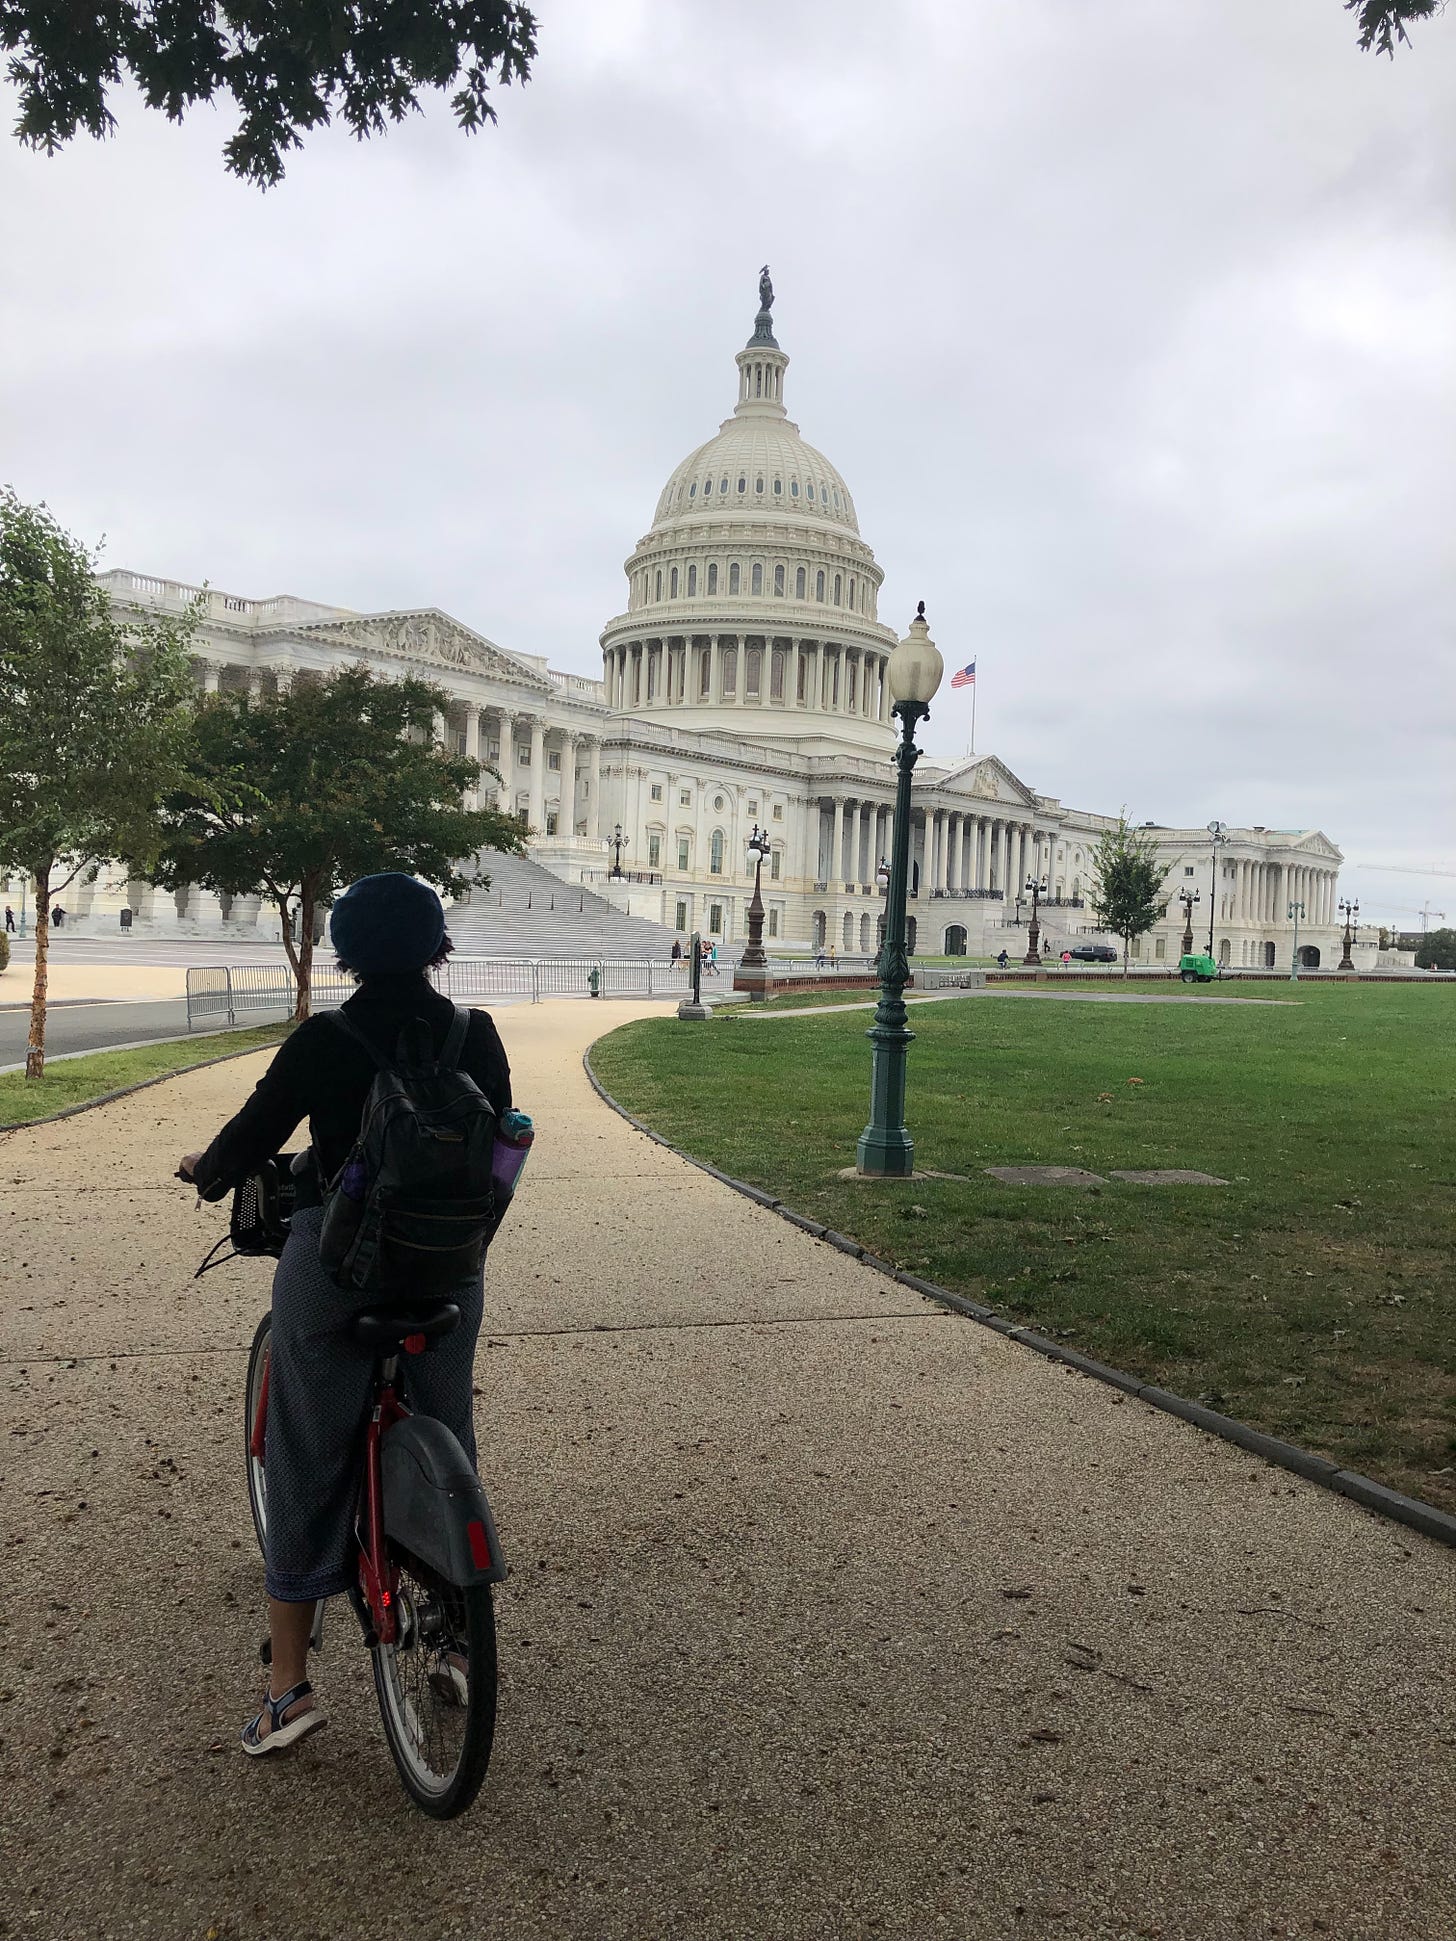 Kristen in the foreground as a shadowy figure on a Capital Bikeeshare bike looking up at the US Capitol on an overcast day